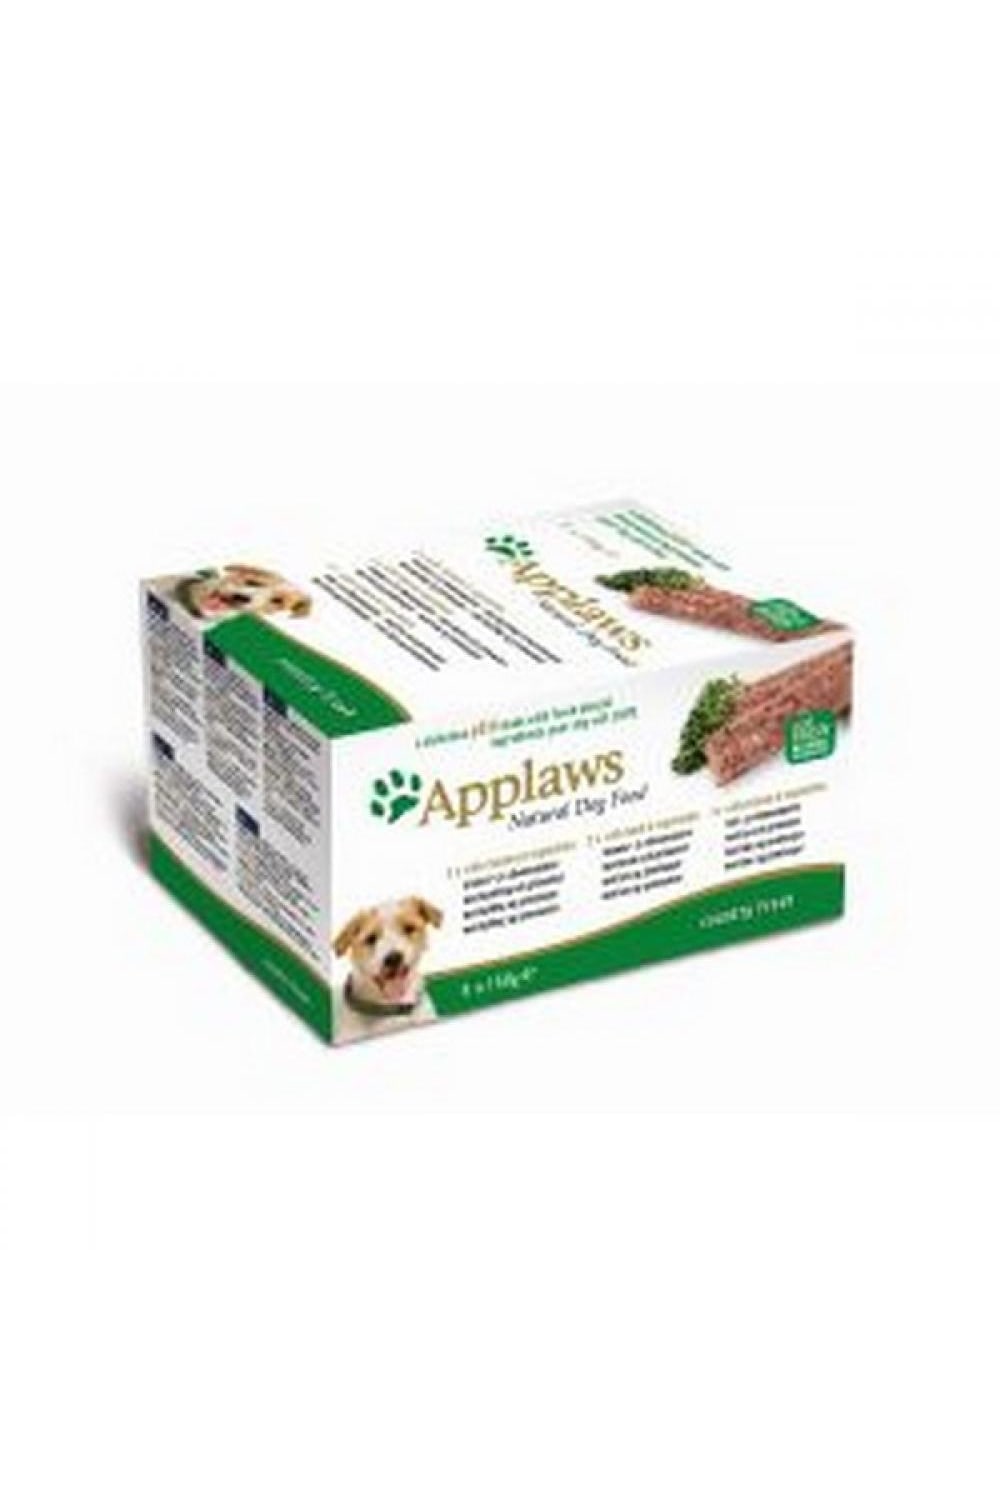 Applaws Pate Multipack Country Fresh Complete Wet Dog Food (5 Trays) (May Vary) (5 x 5.3oz)